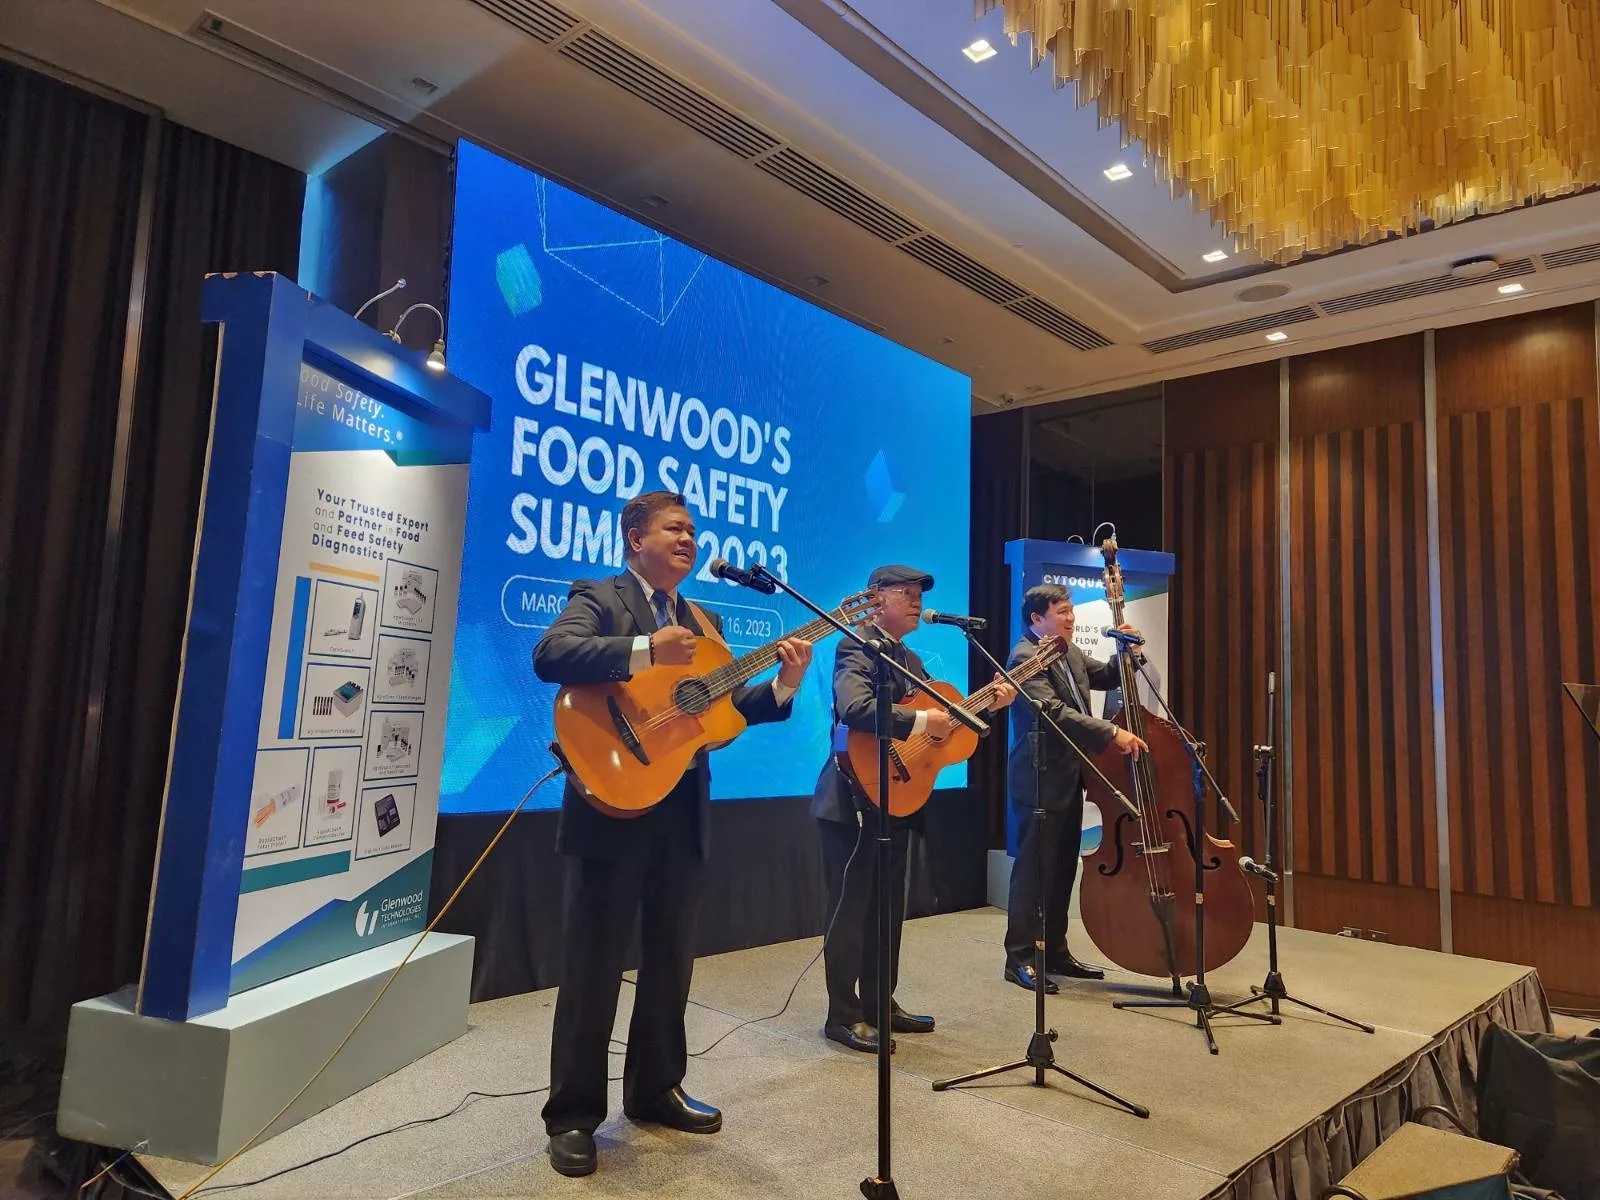 Glenwood’s Food Safety Summit 2023: Shaping the Future of Food and Feed Safety